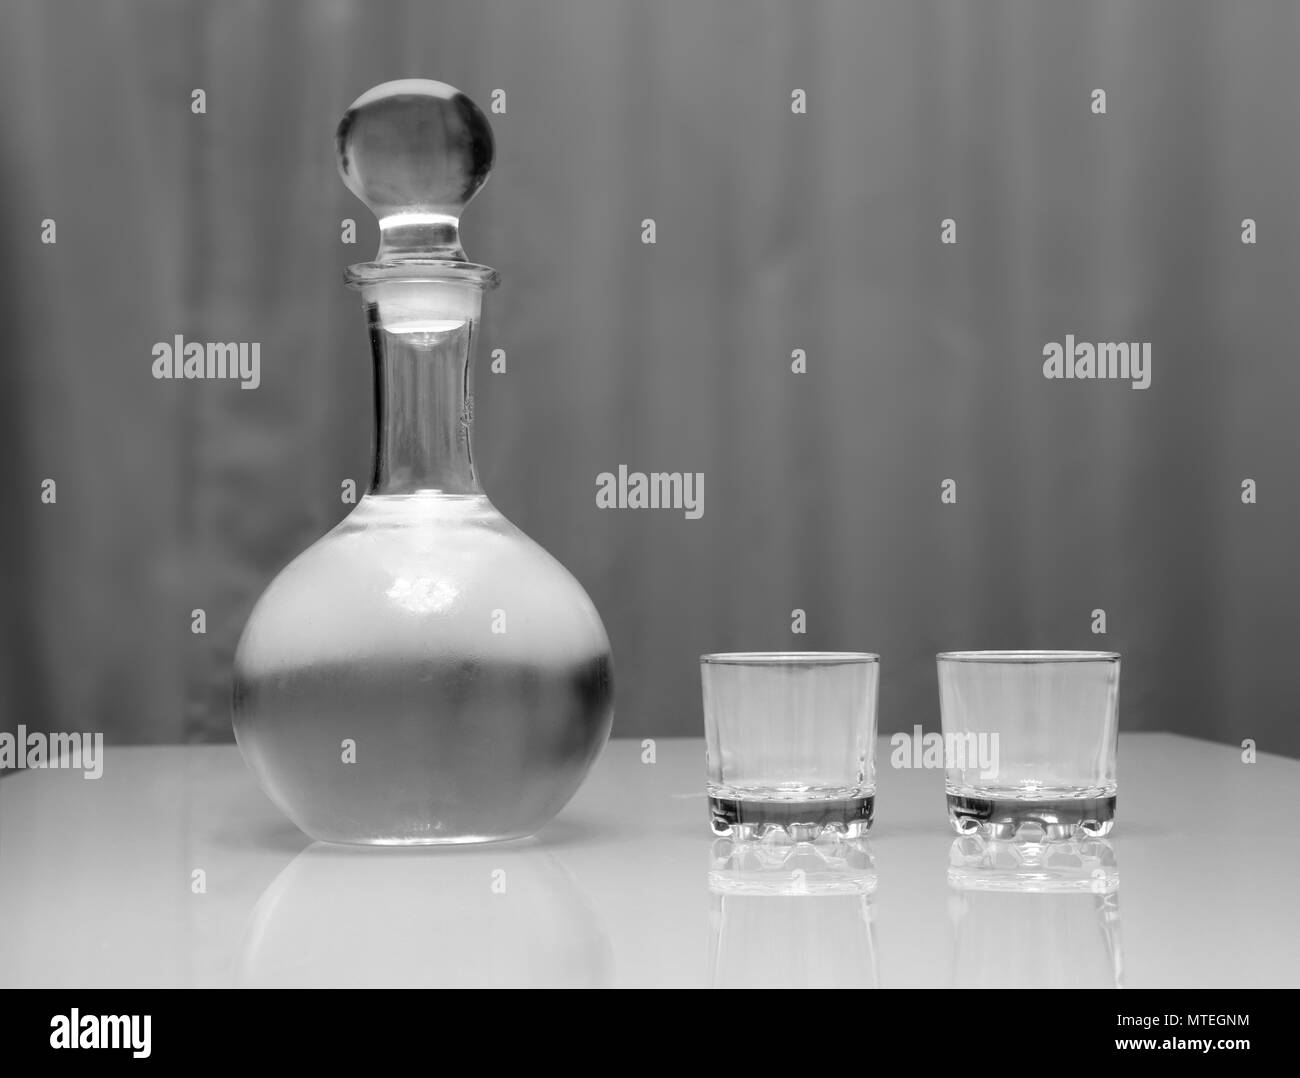 https://c8.alamy.com/comp/MTEGNM/decanter-and-two-glasses-with-vodka-standing-on-table-MTEGNM.jpg